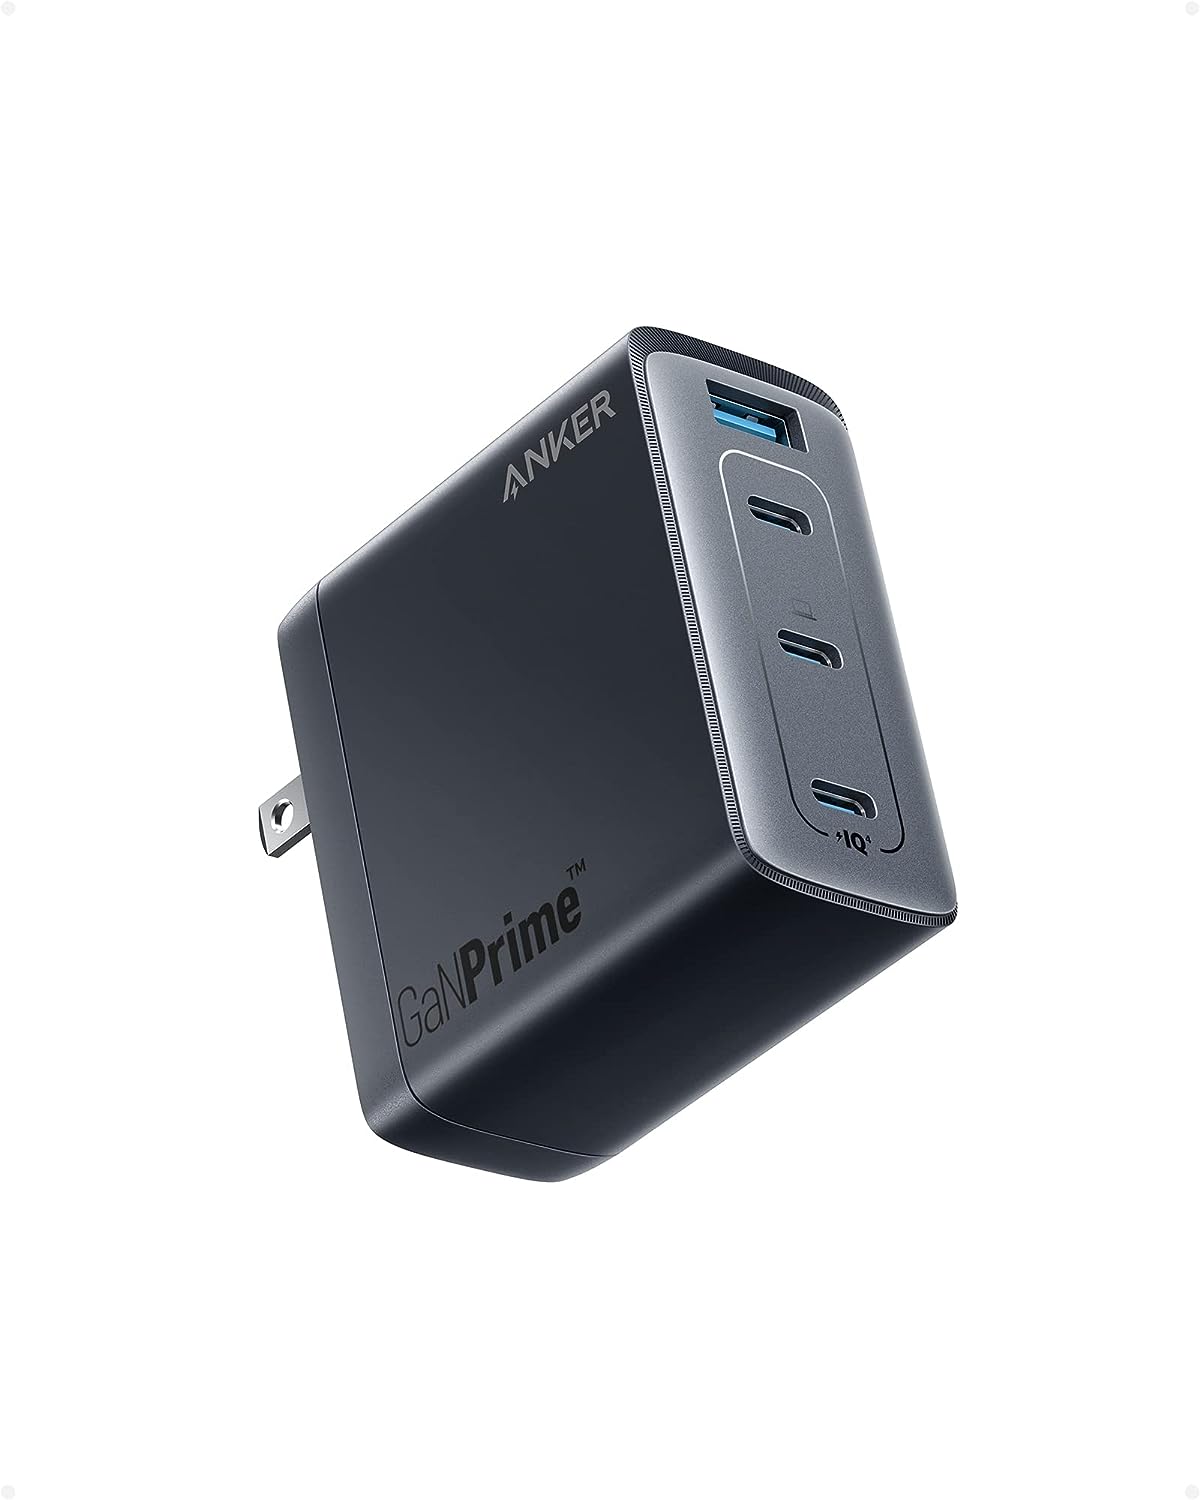 Anker USB C 747 GaNPrime 150W, PPS 4-Port USB-C Wall Charger $69.99 + Free Shipping